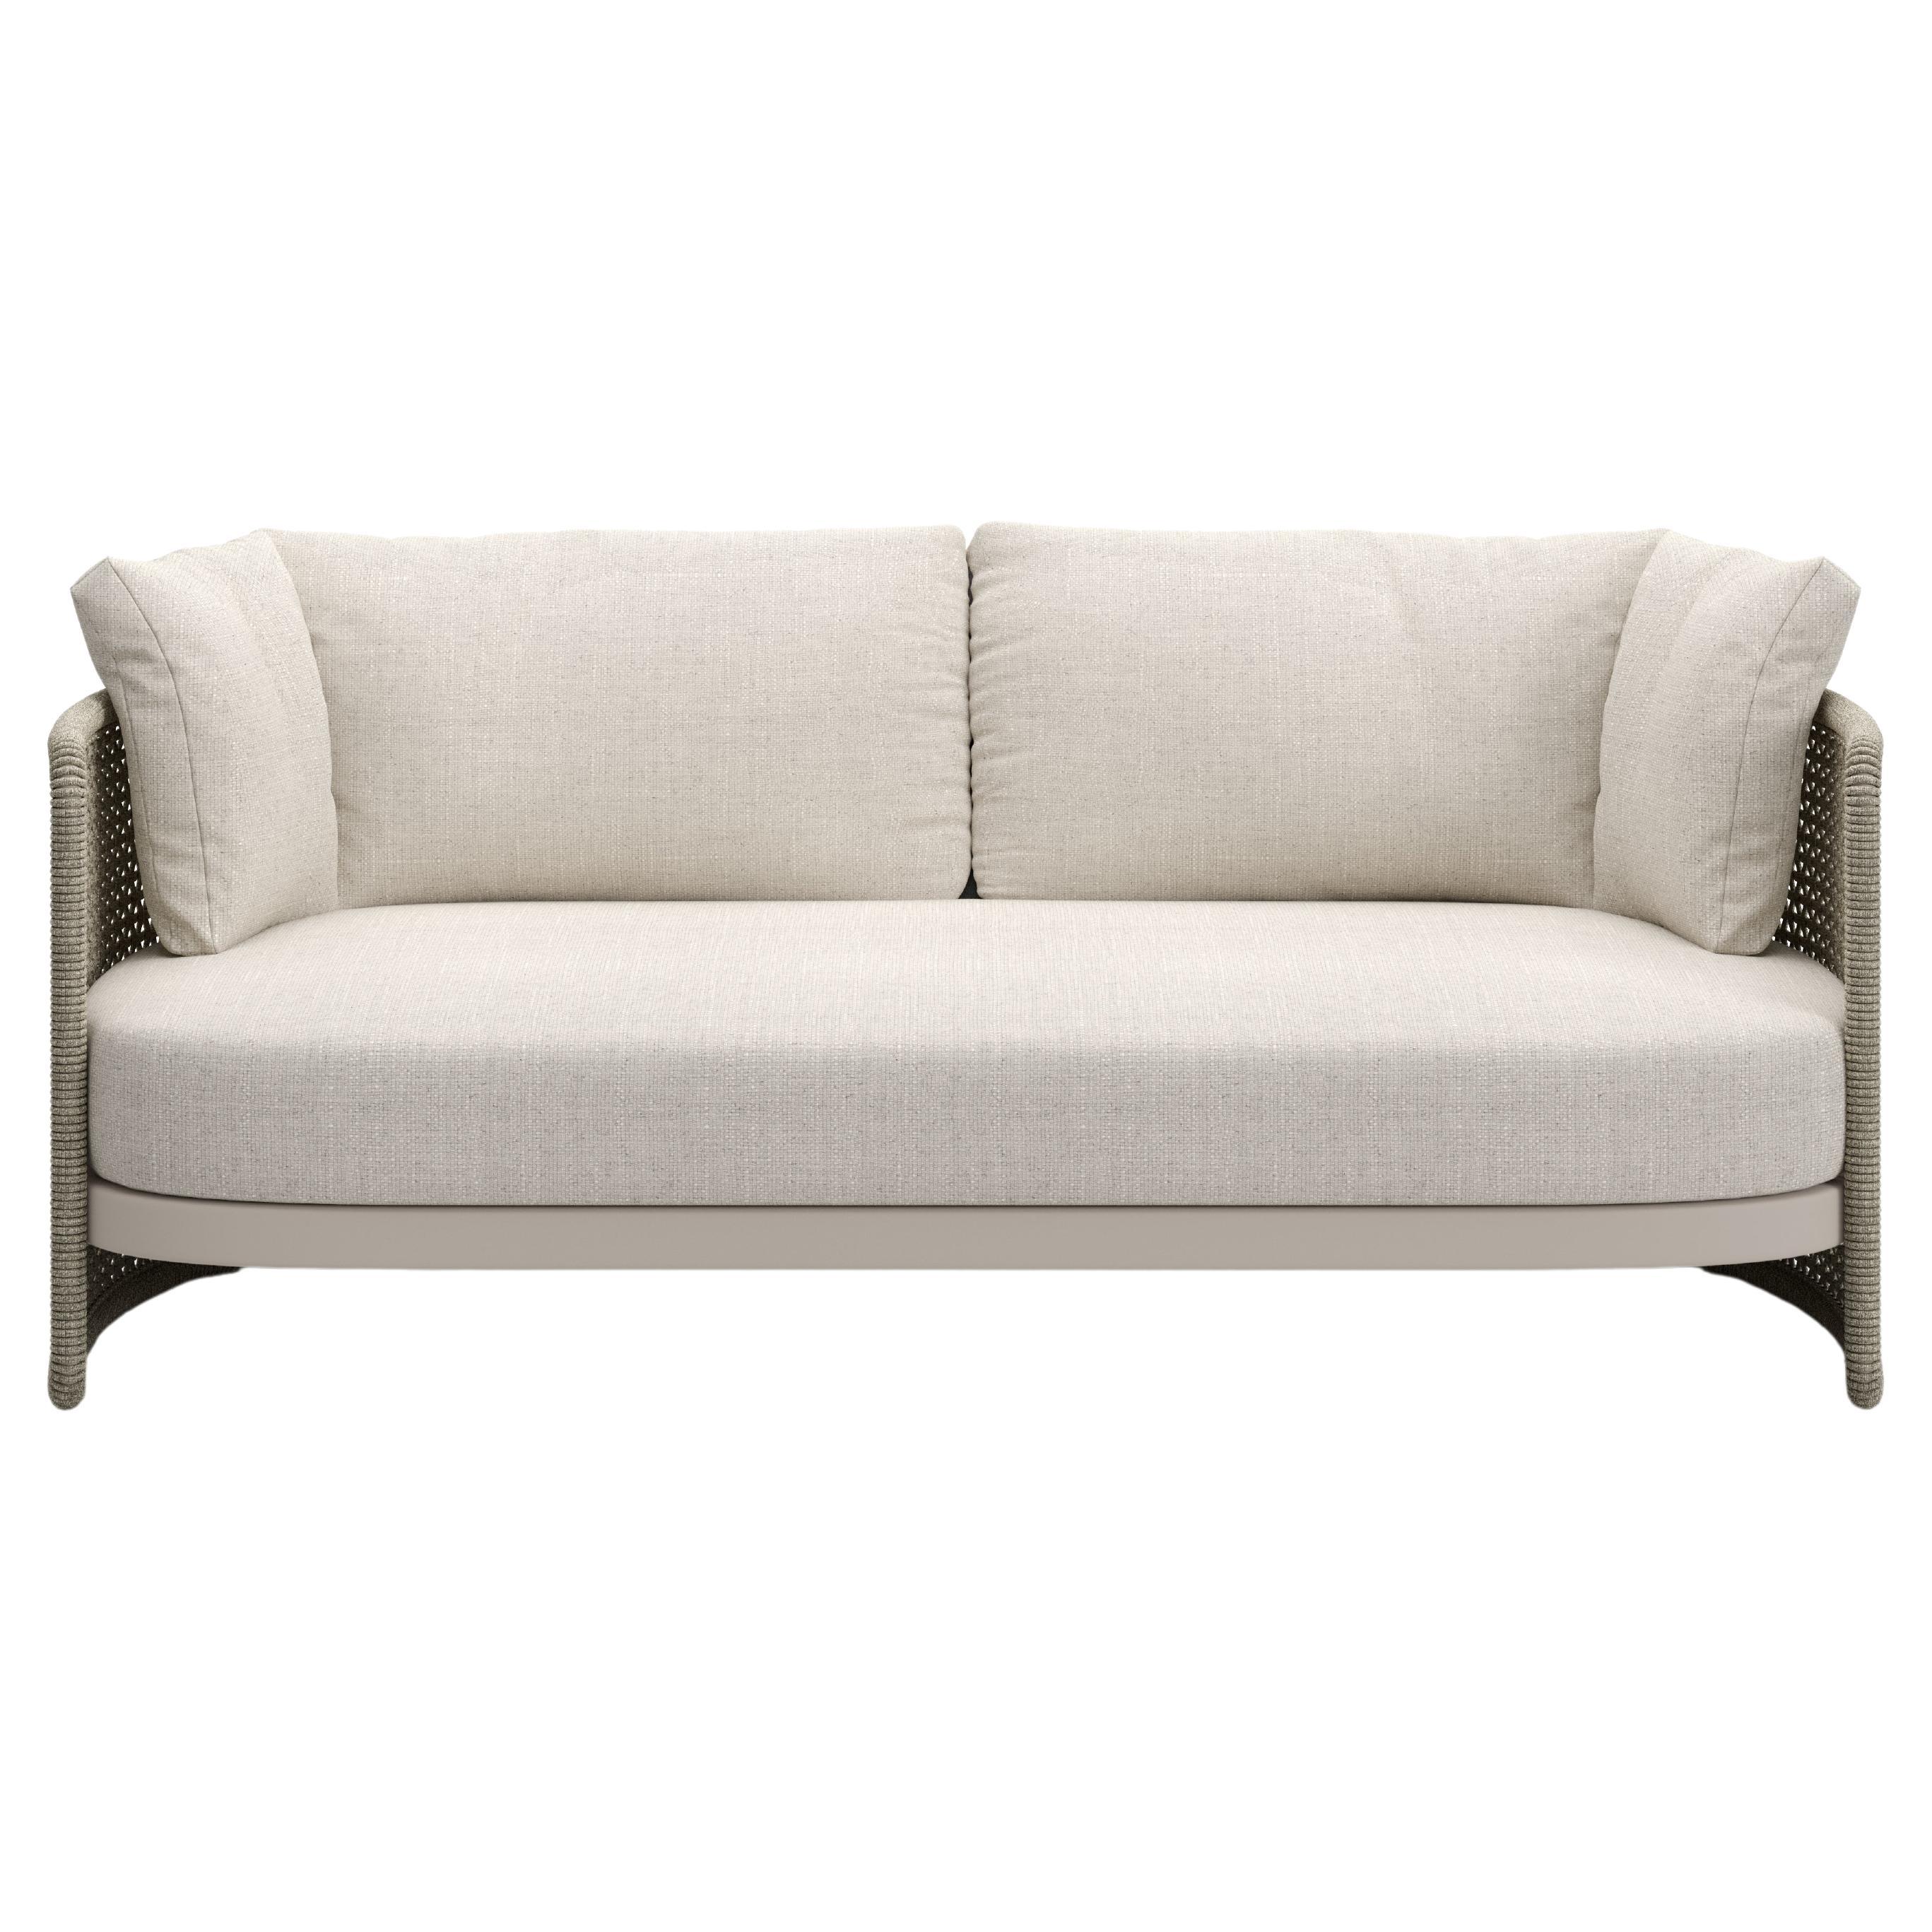 Miura-bisque Outdoor 2 Seater Sofa by SNOC For Sale